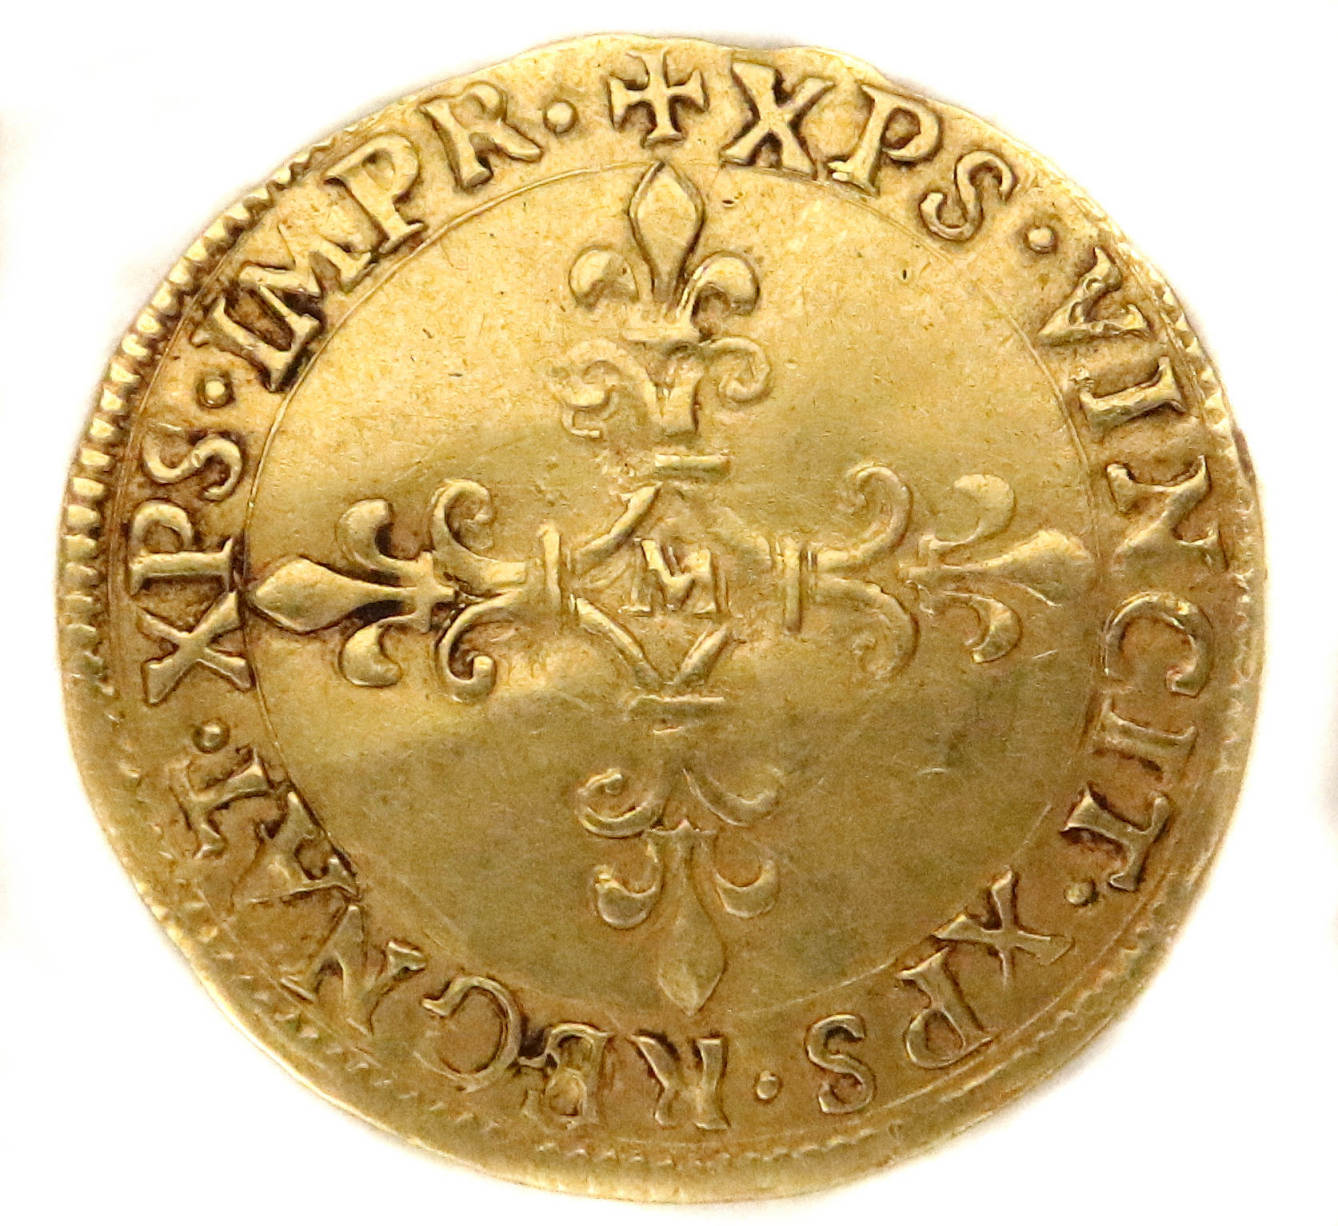 CHARLES IXECU OR 1567 TOULOUSE REVERS